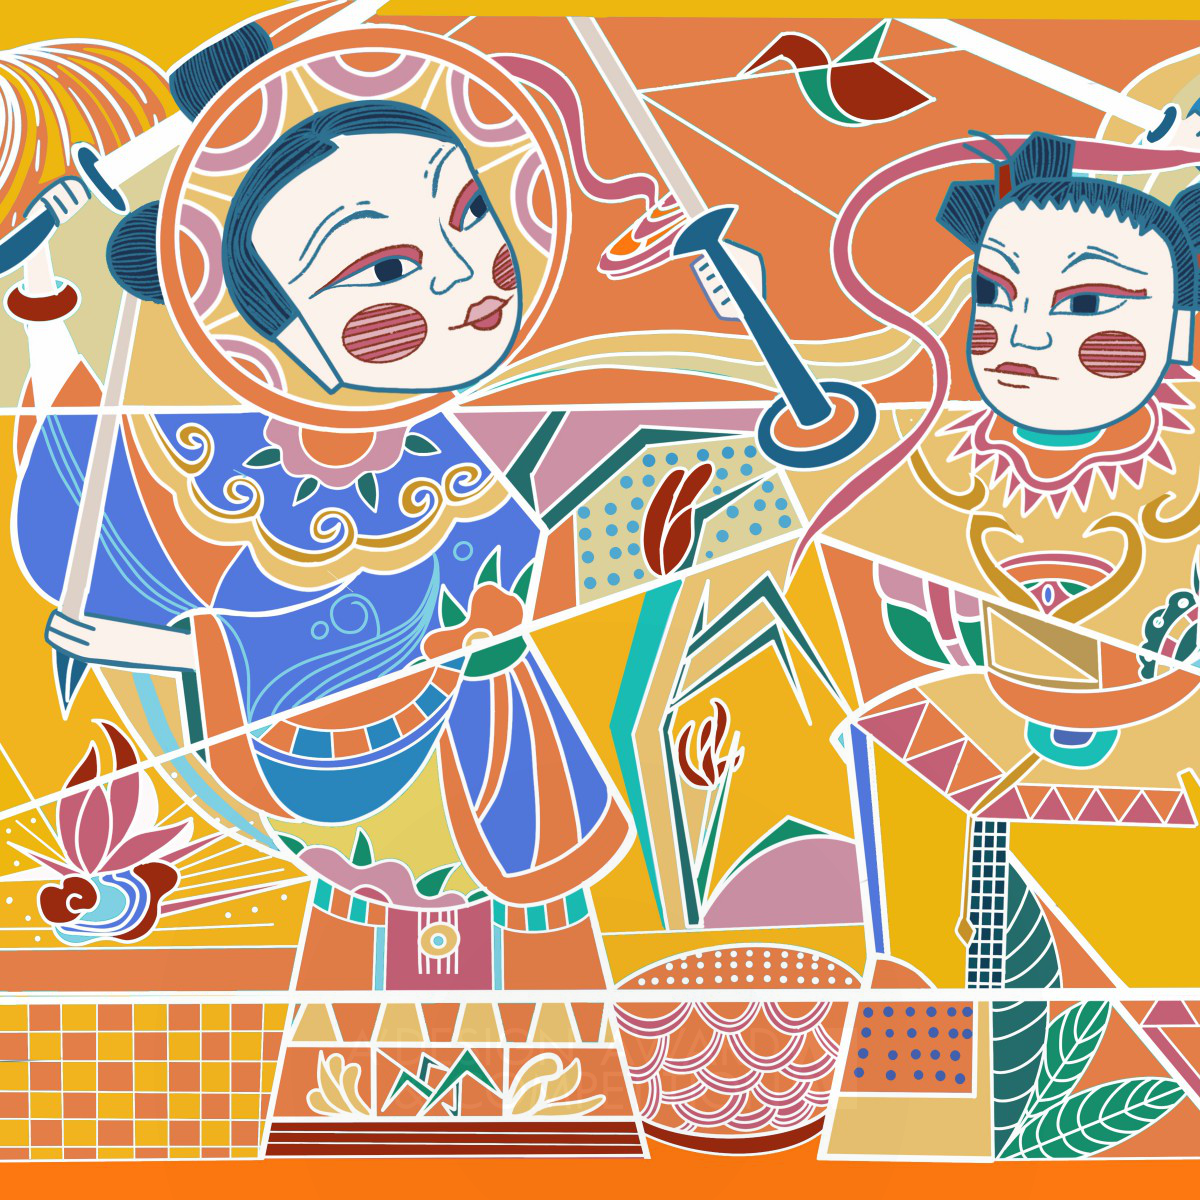 Henan Illustration: Reviving the Beauty of New Year Pictures